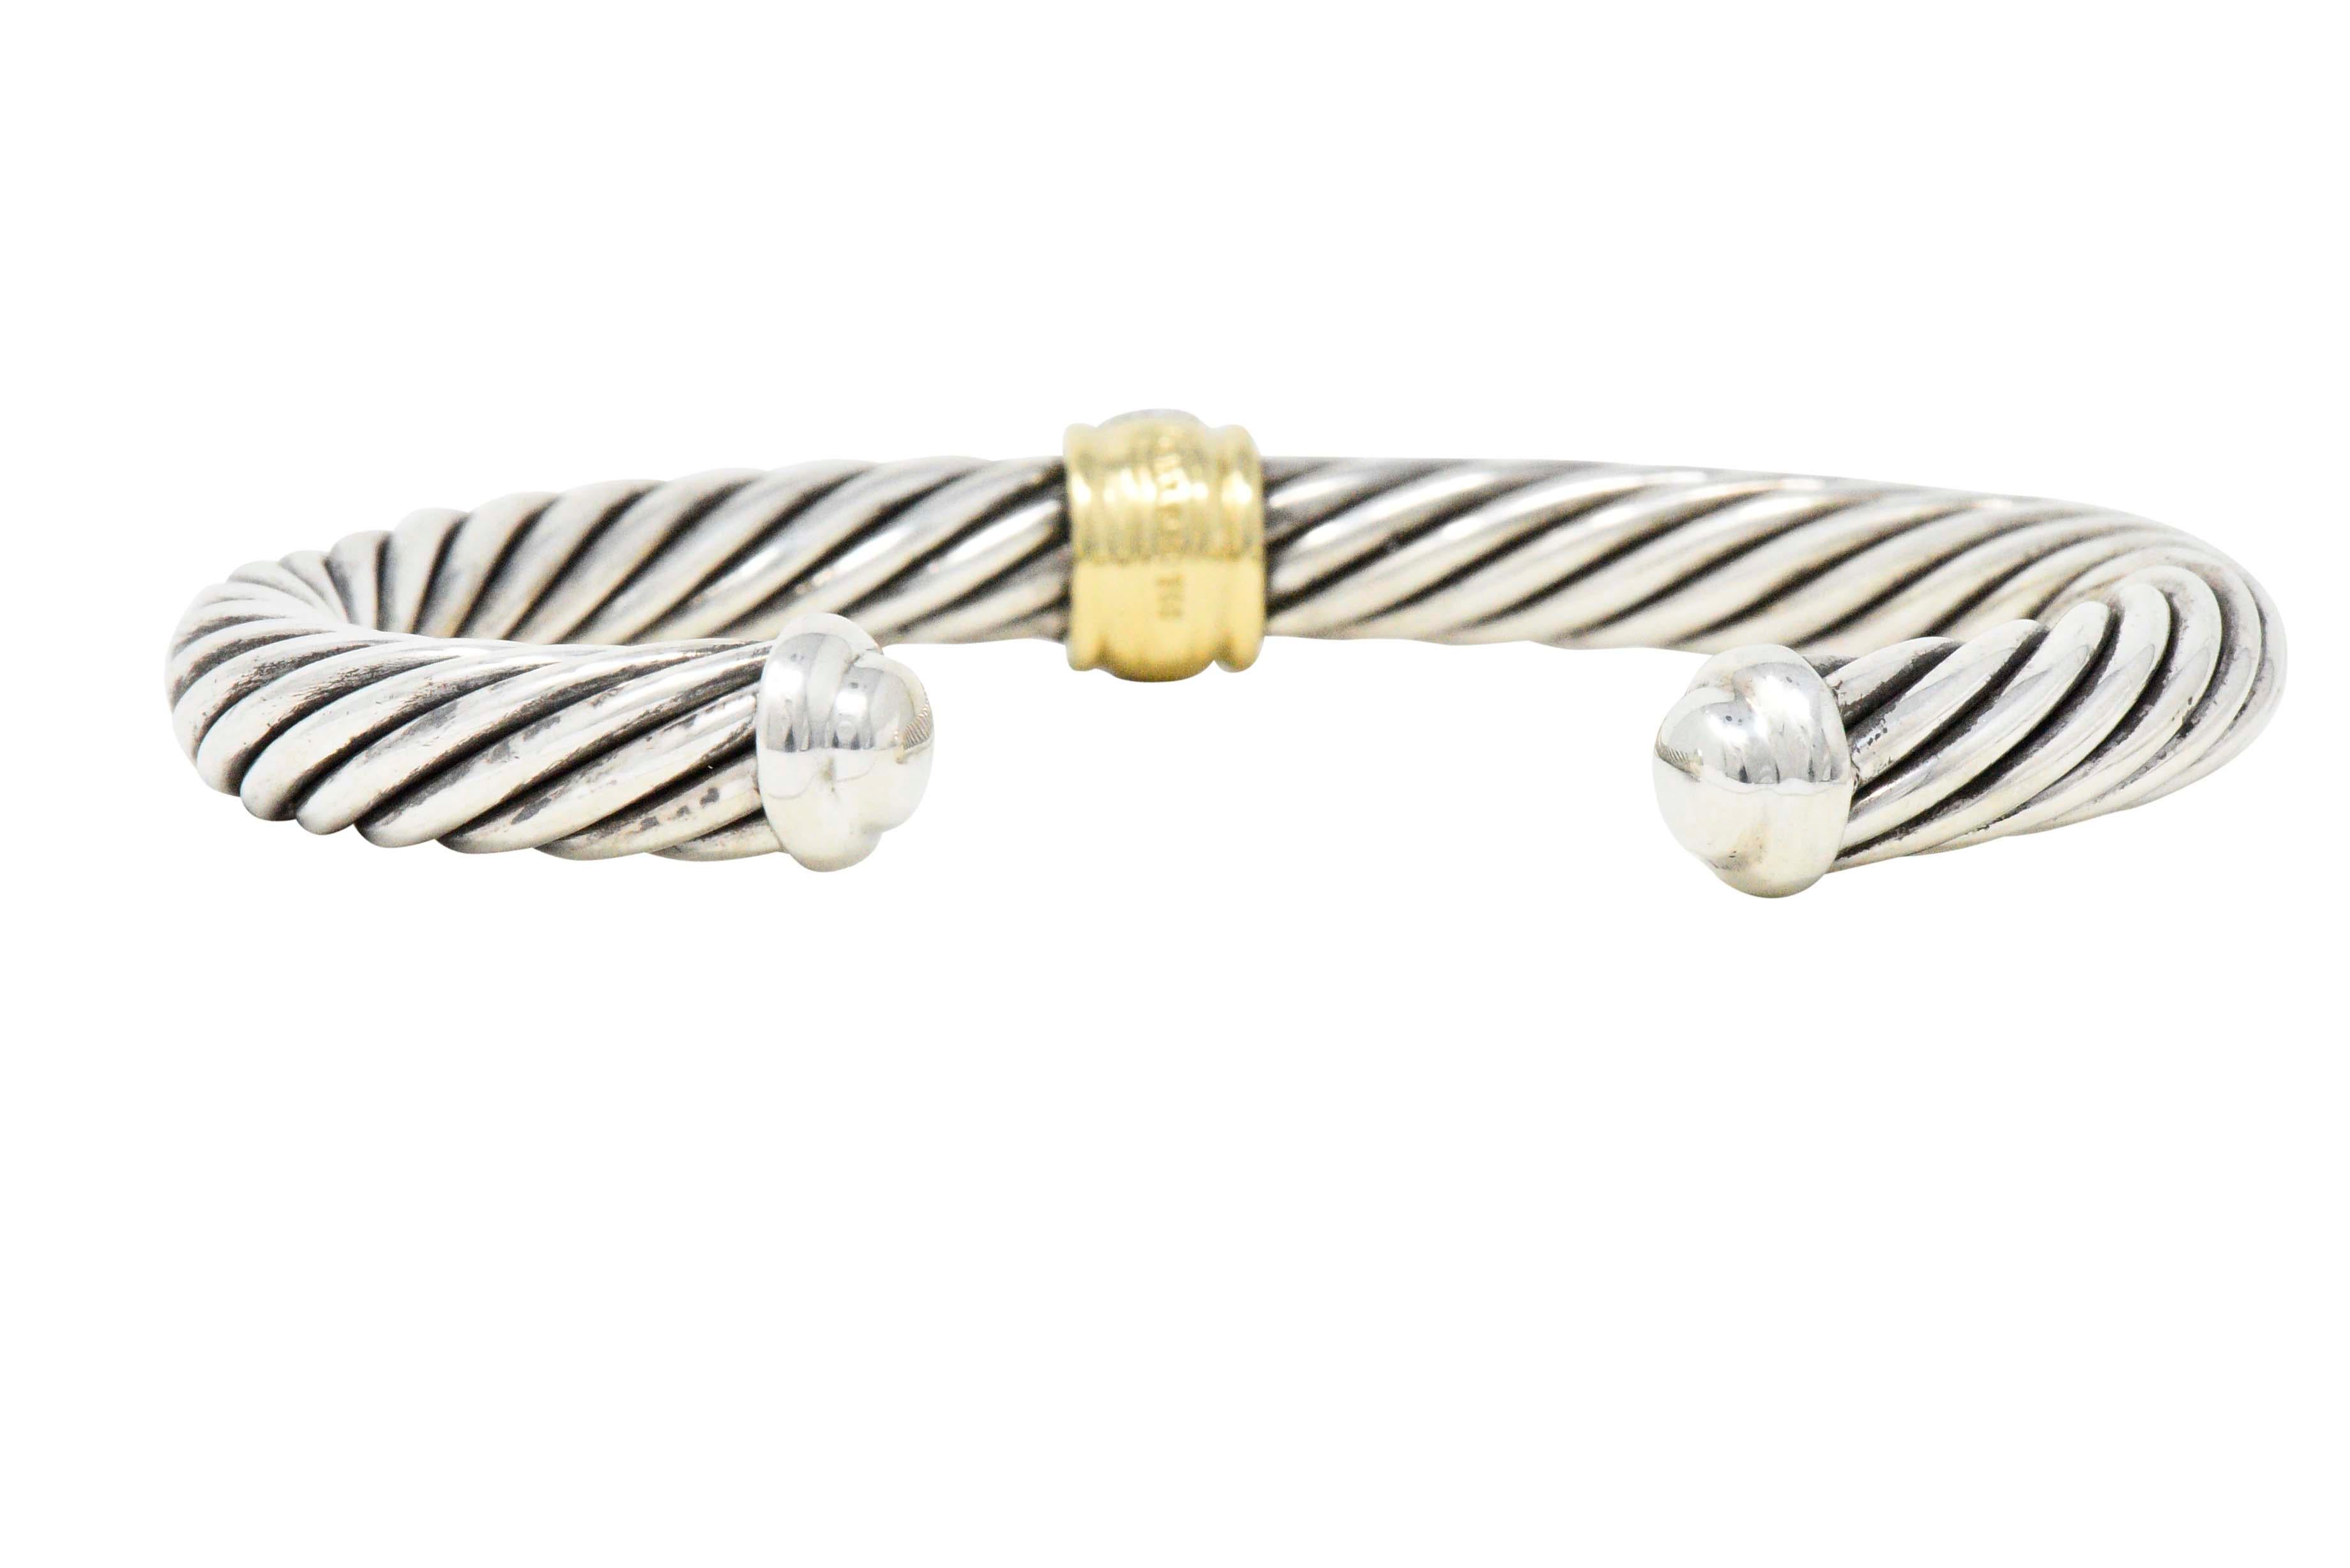 Cuff stye bangle bracelet centering round brilliant cut pavé set diamonds, weighing approximately 0.30 carats total, G/H color and VS to SI clarity
Twisted sterling silver with polished gold accents and polished silver terminals
Signed D.Y. 
Length: